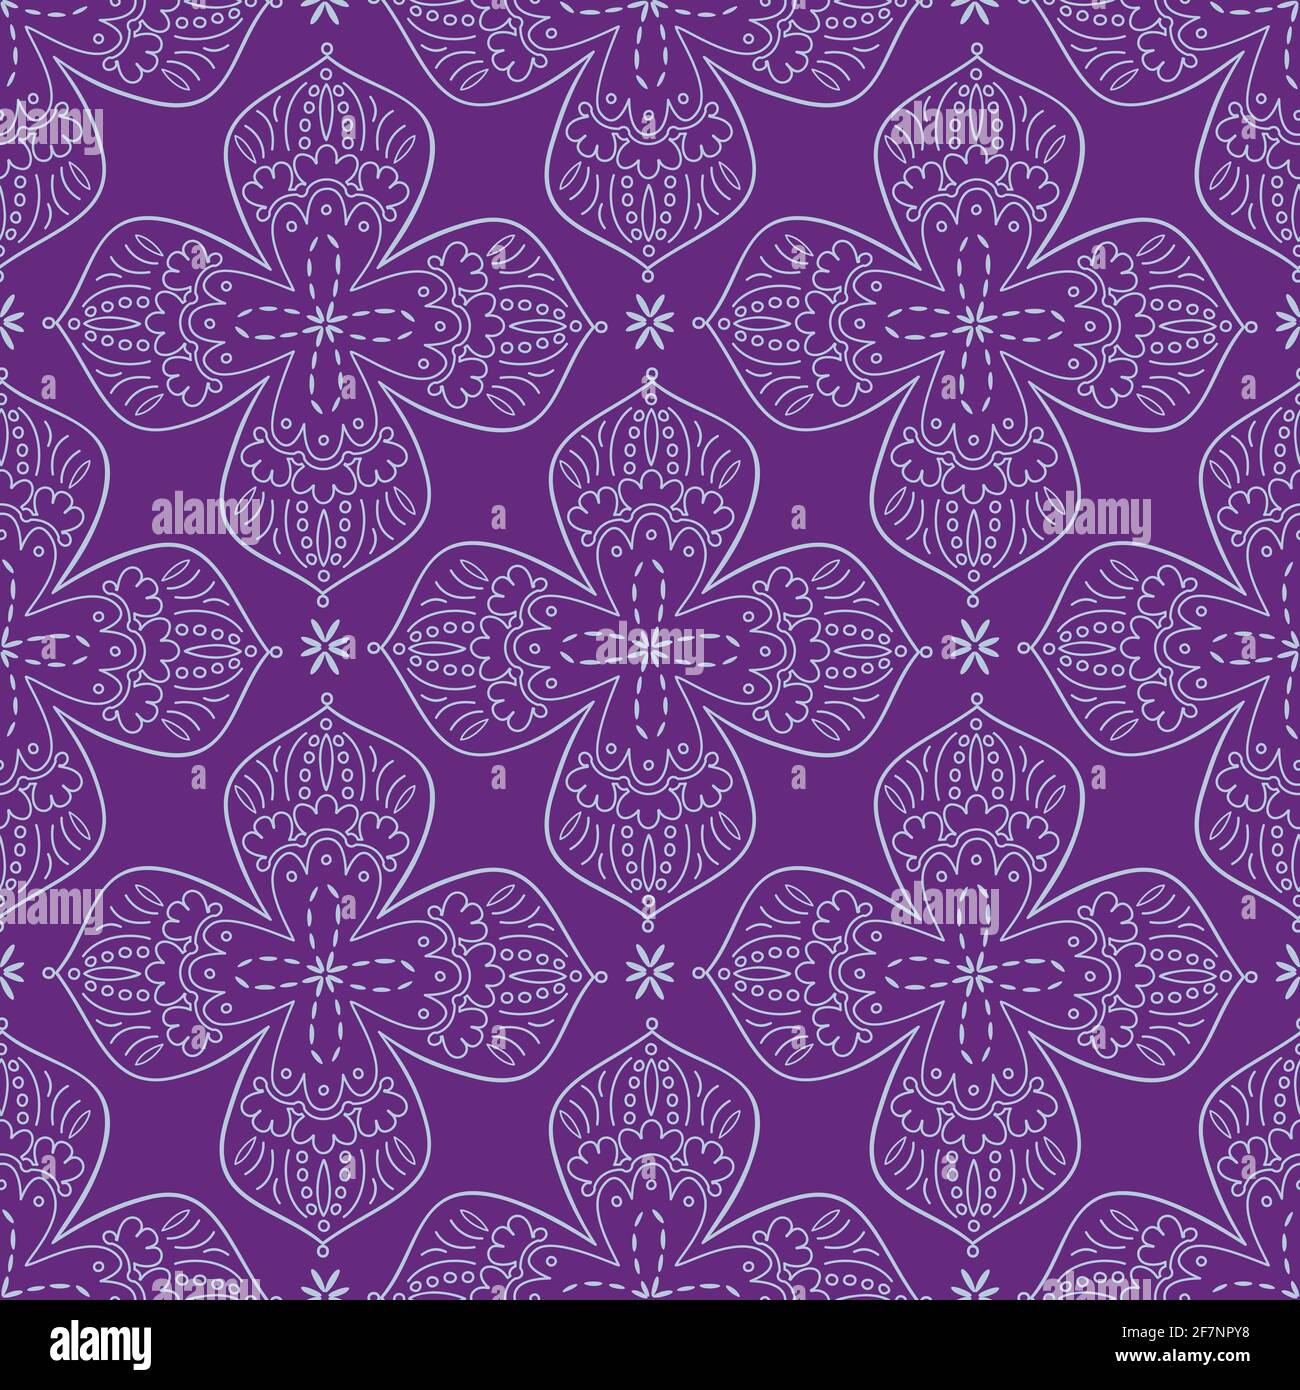 Stylized lacy contoured floral four pointed shape nature inspired motif with geometric execution in neutral greyish blue tone on purple. Web/print use Stock Vector